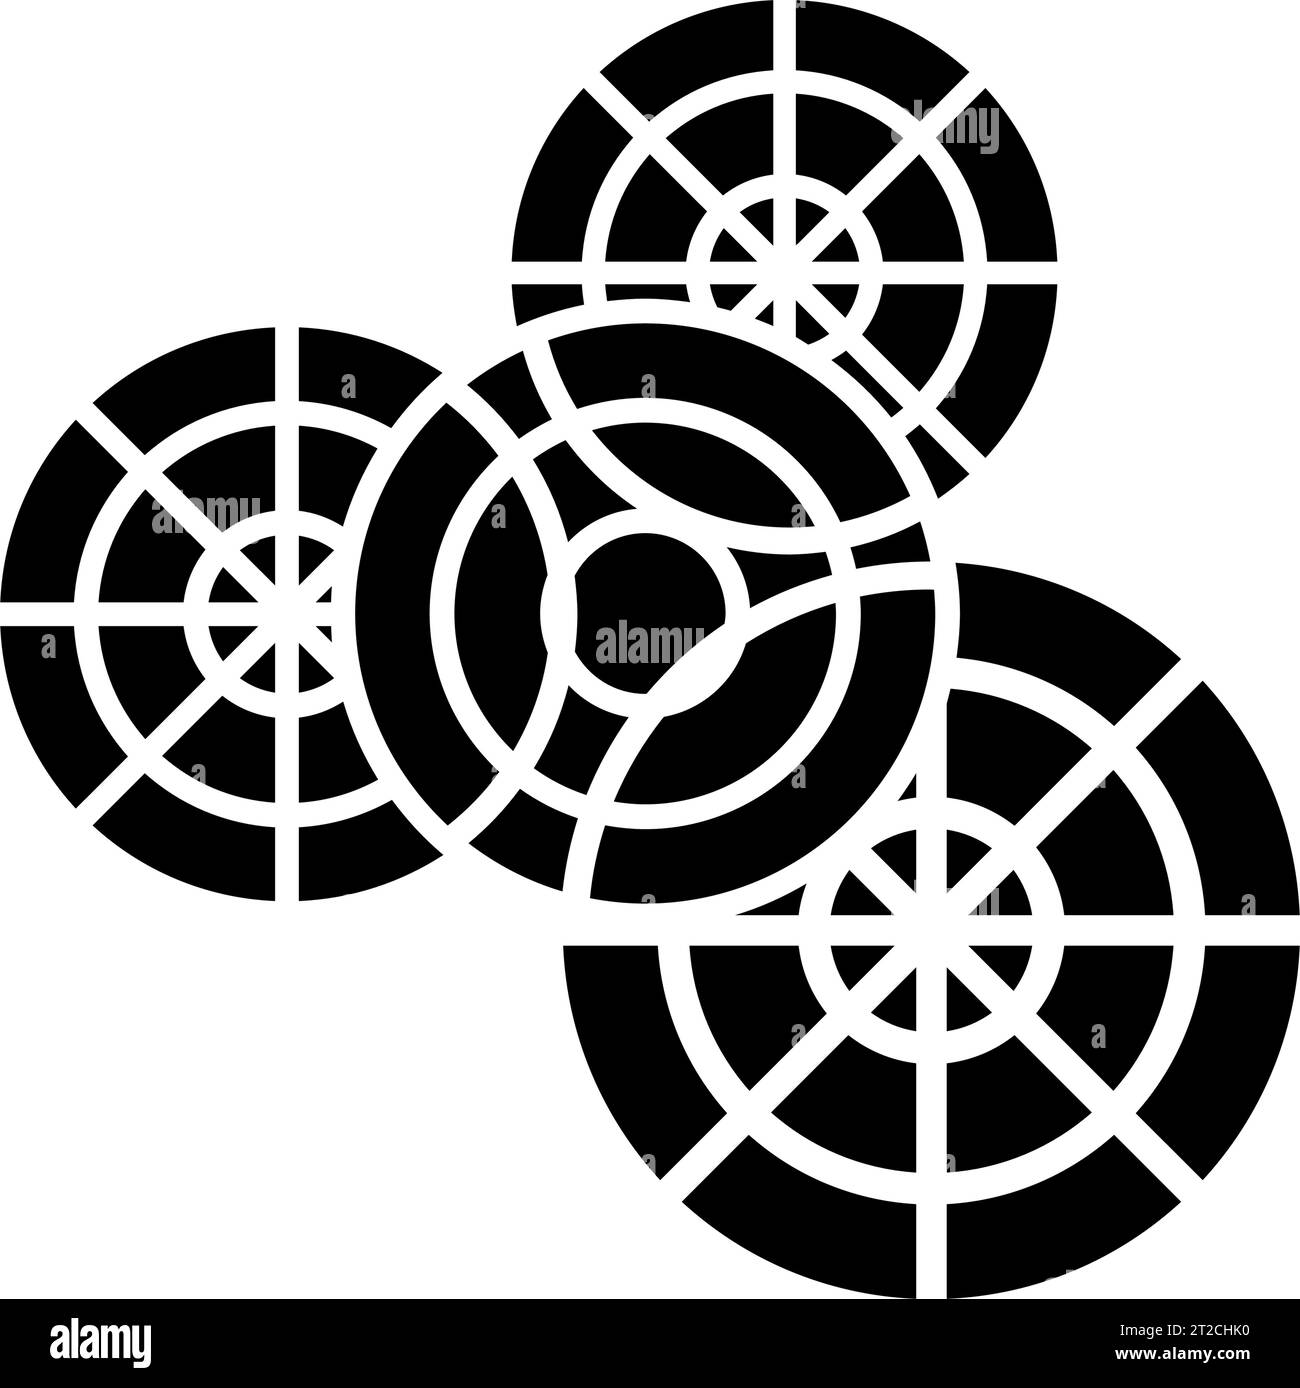 Black Abstract Gear Shaped Icon with Overlapping Circles on a White Background Stock Vector